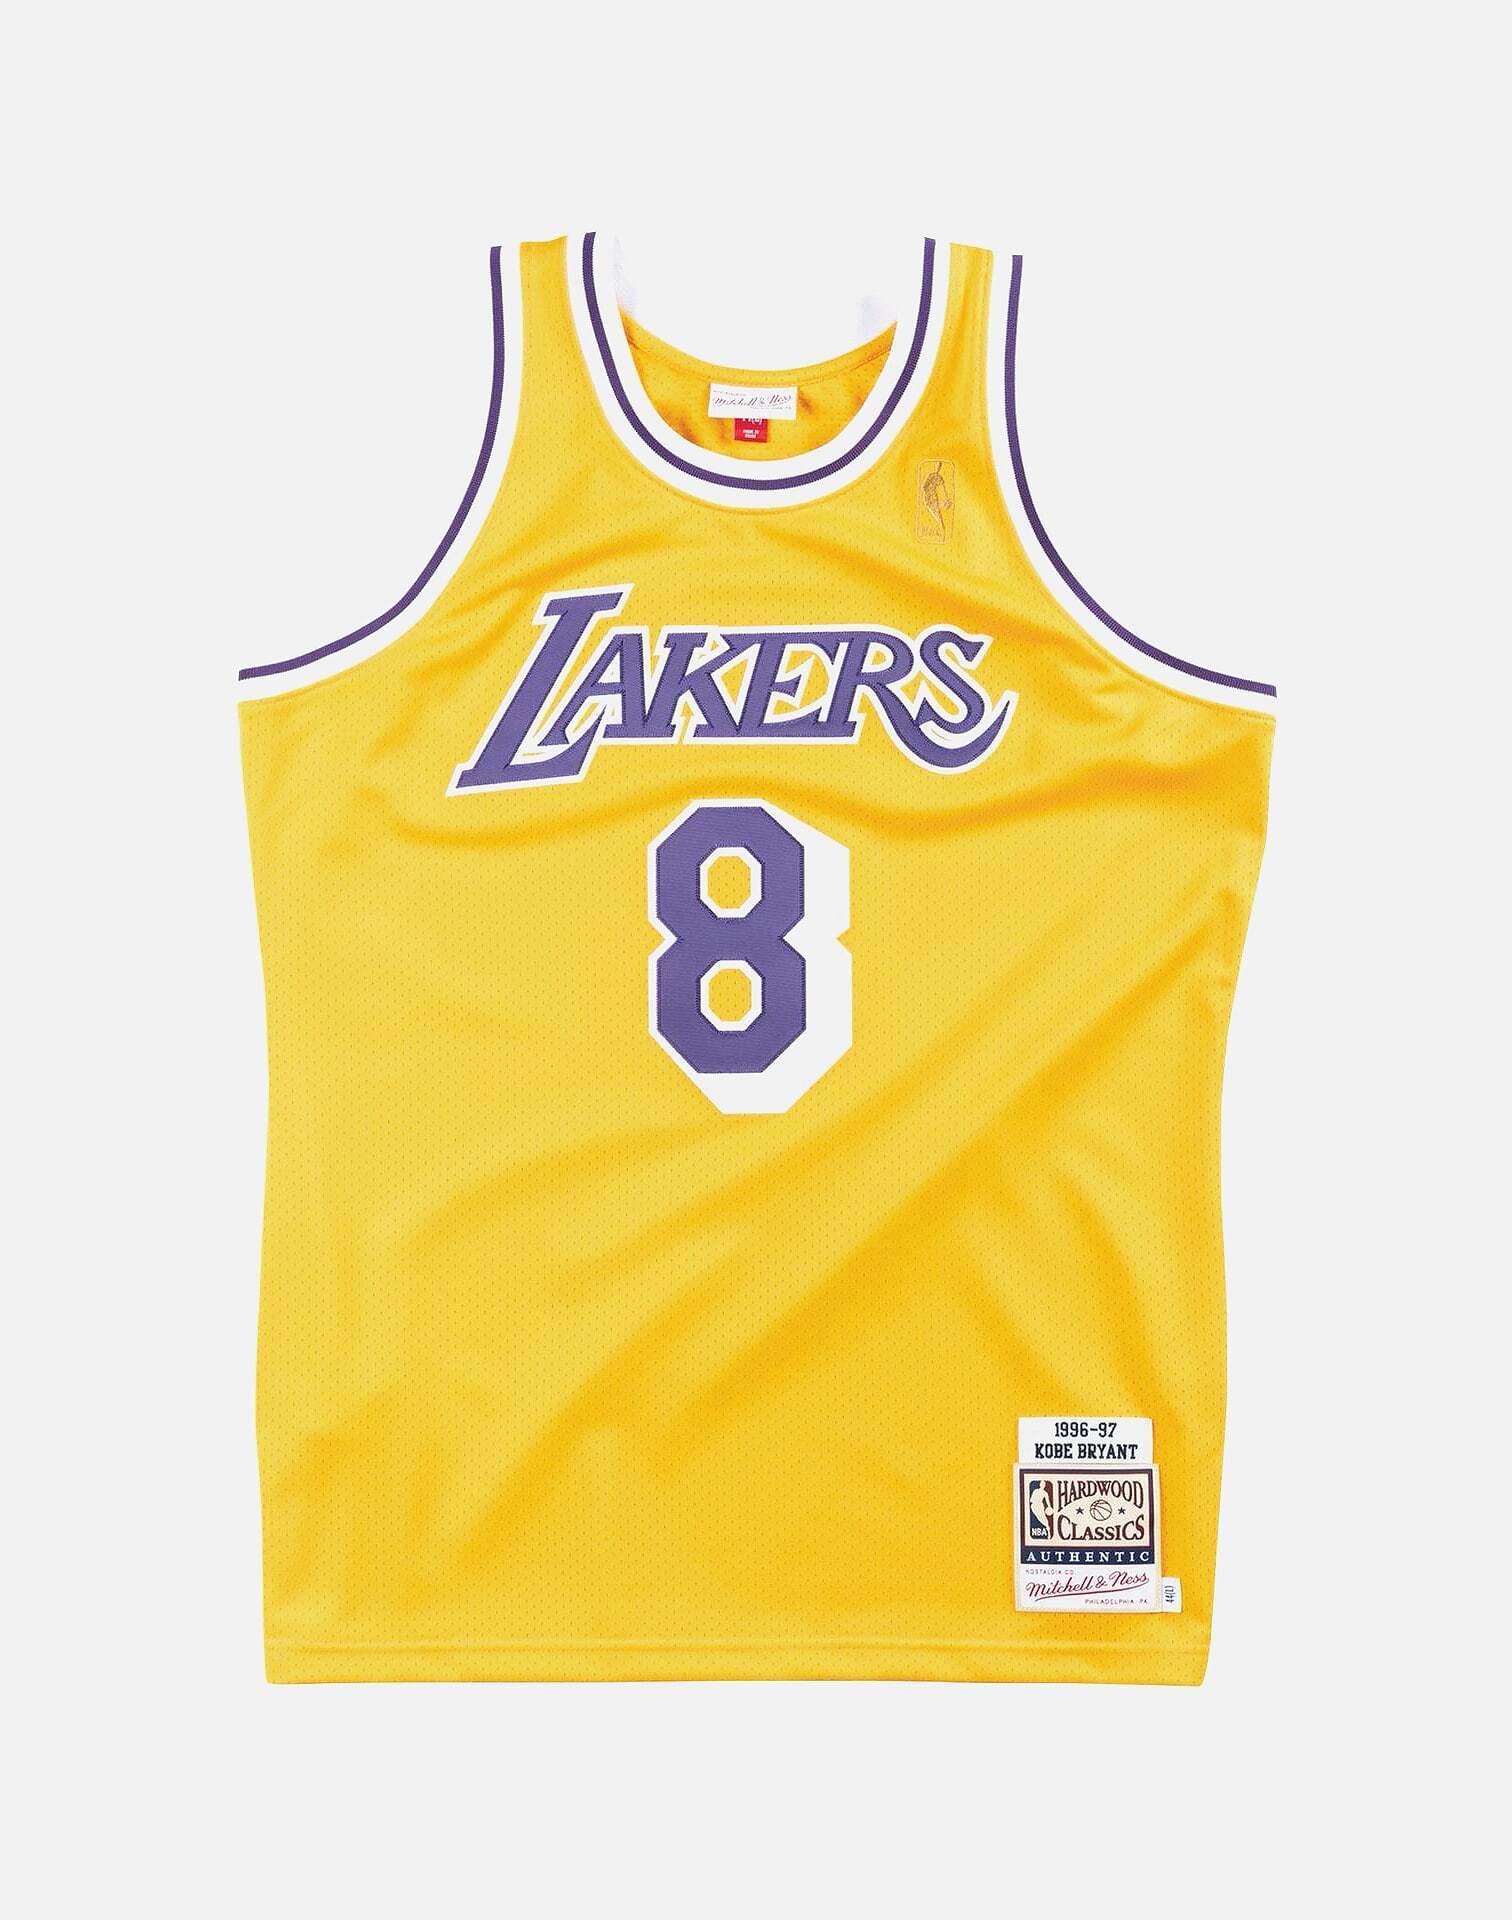 Shop Kobe Bryant Jersey 8 And 24 with great discounts and prices